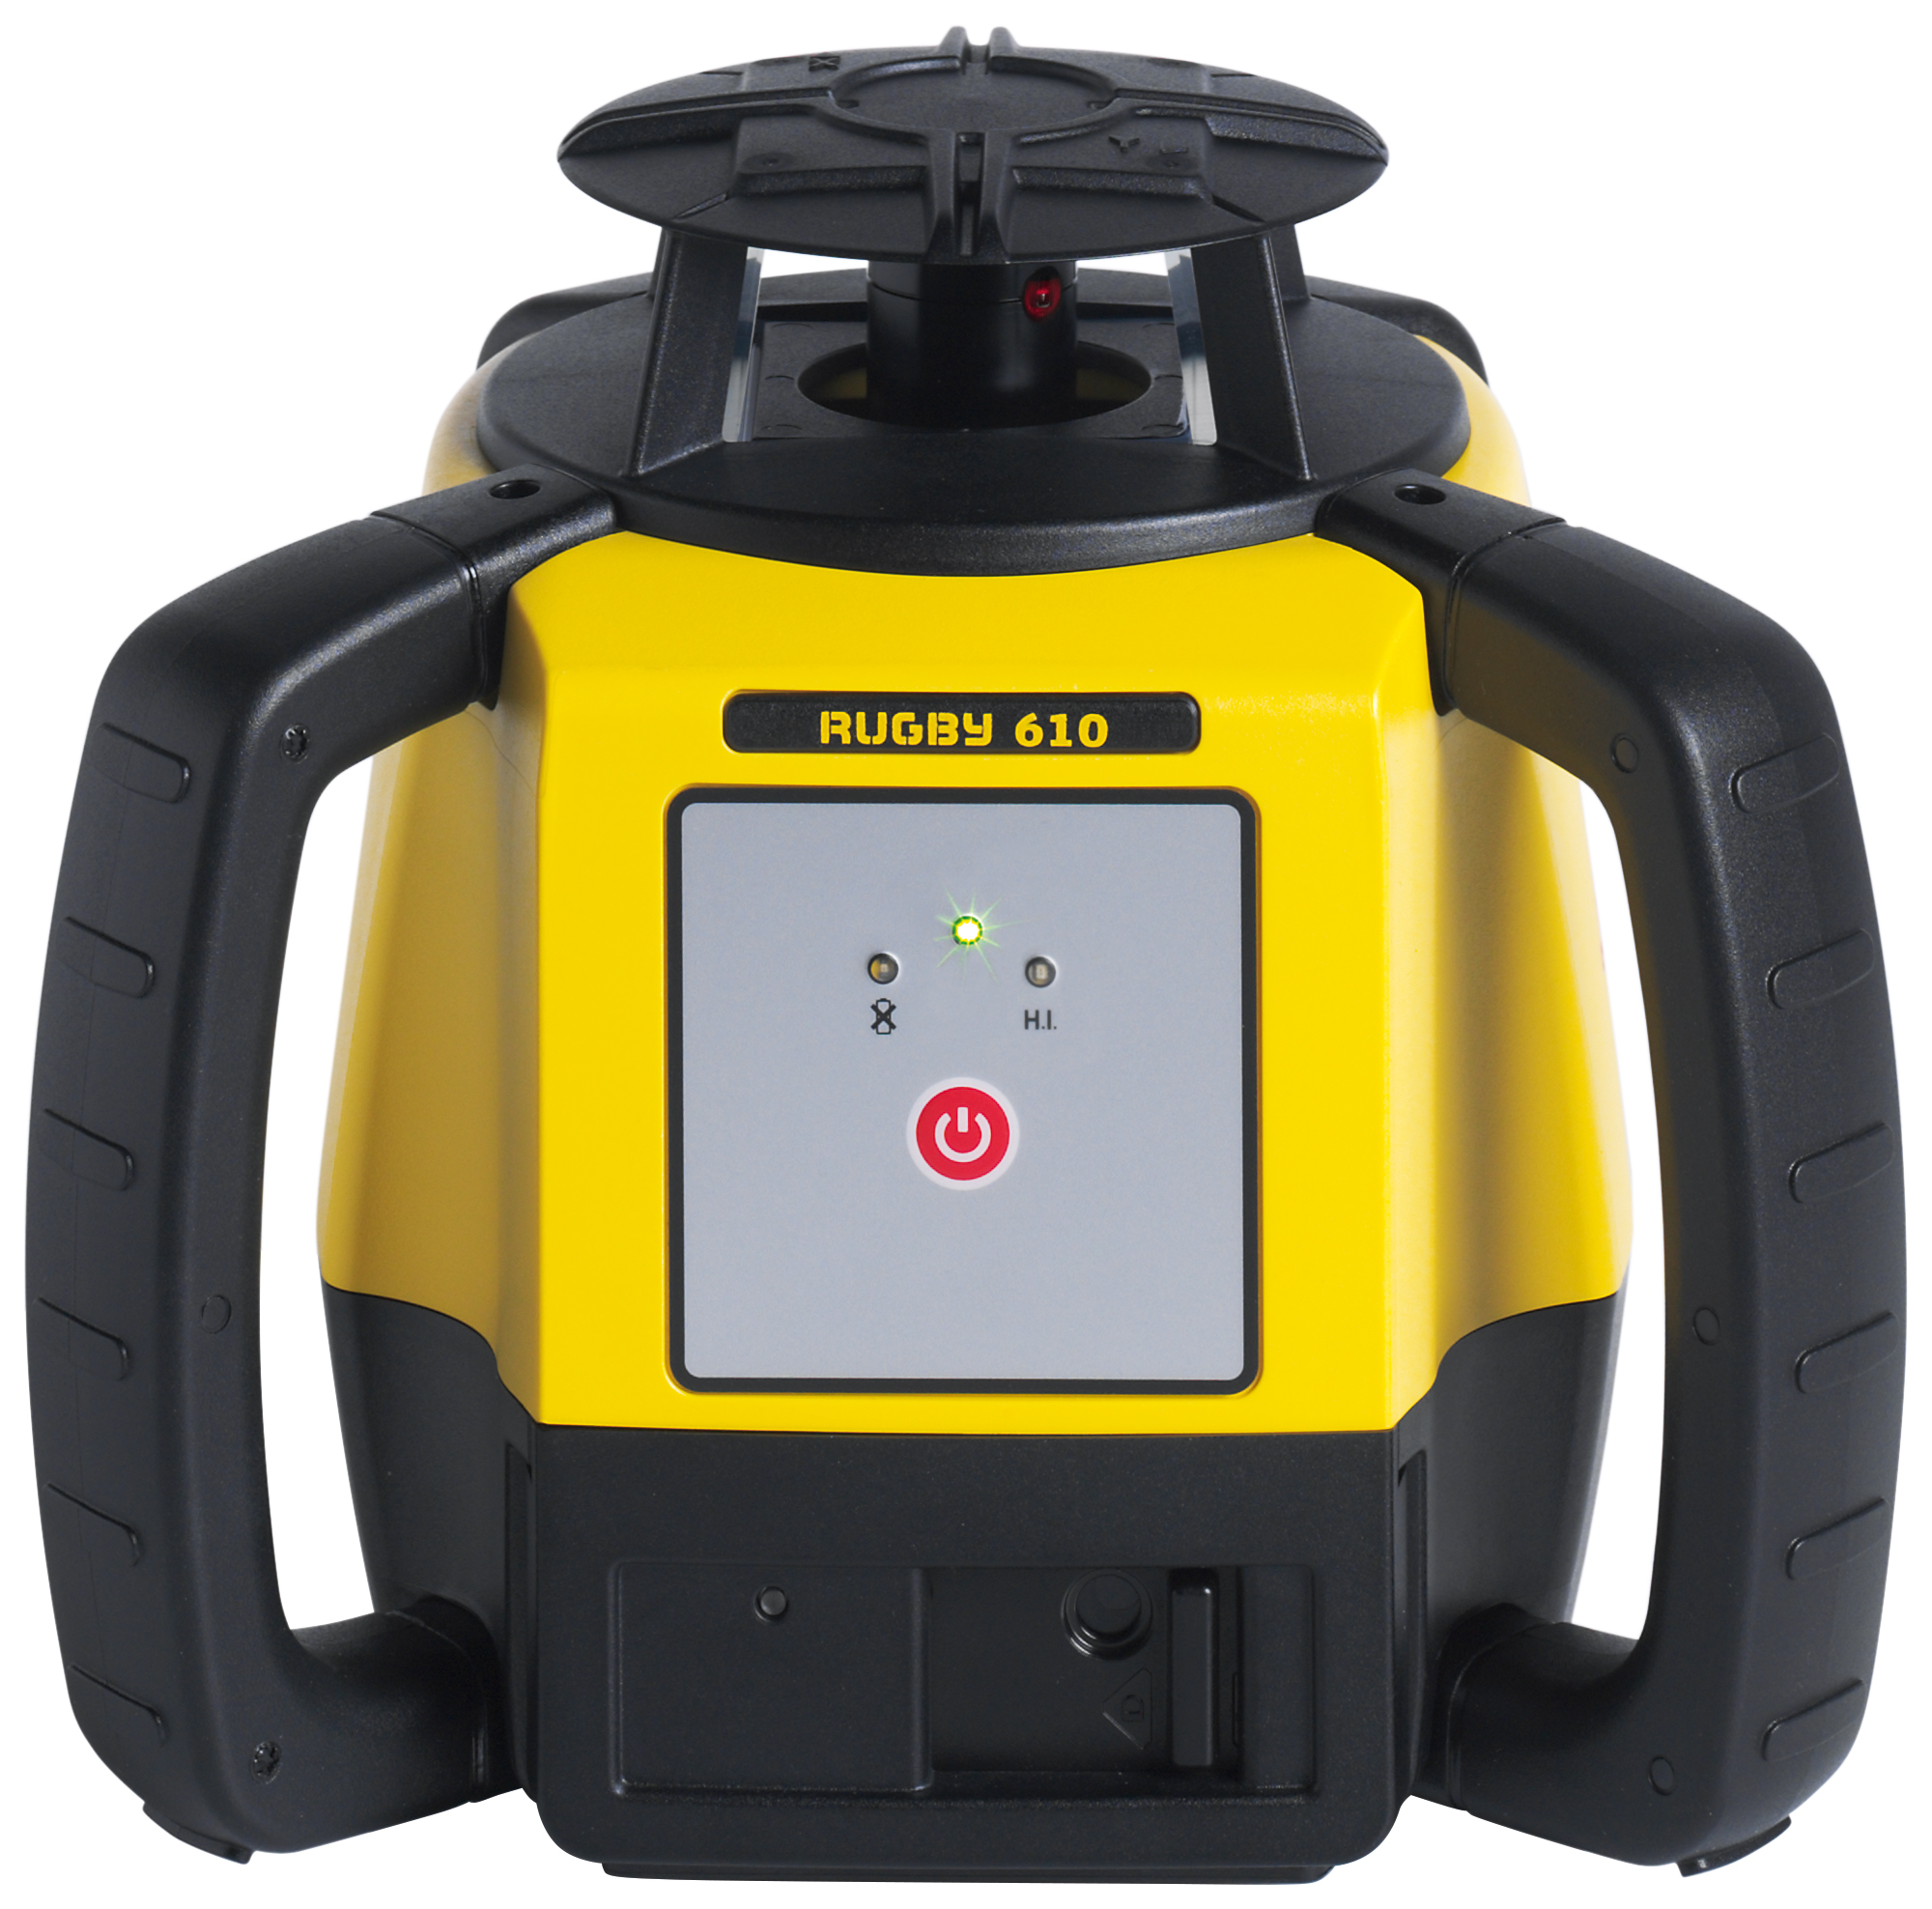 Leica Rugby 610 RE120 Li-ion Self Levelling Rotating Laser Level